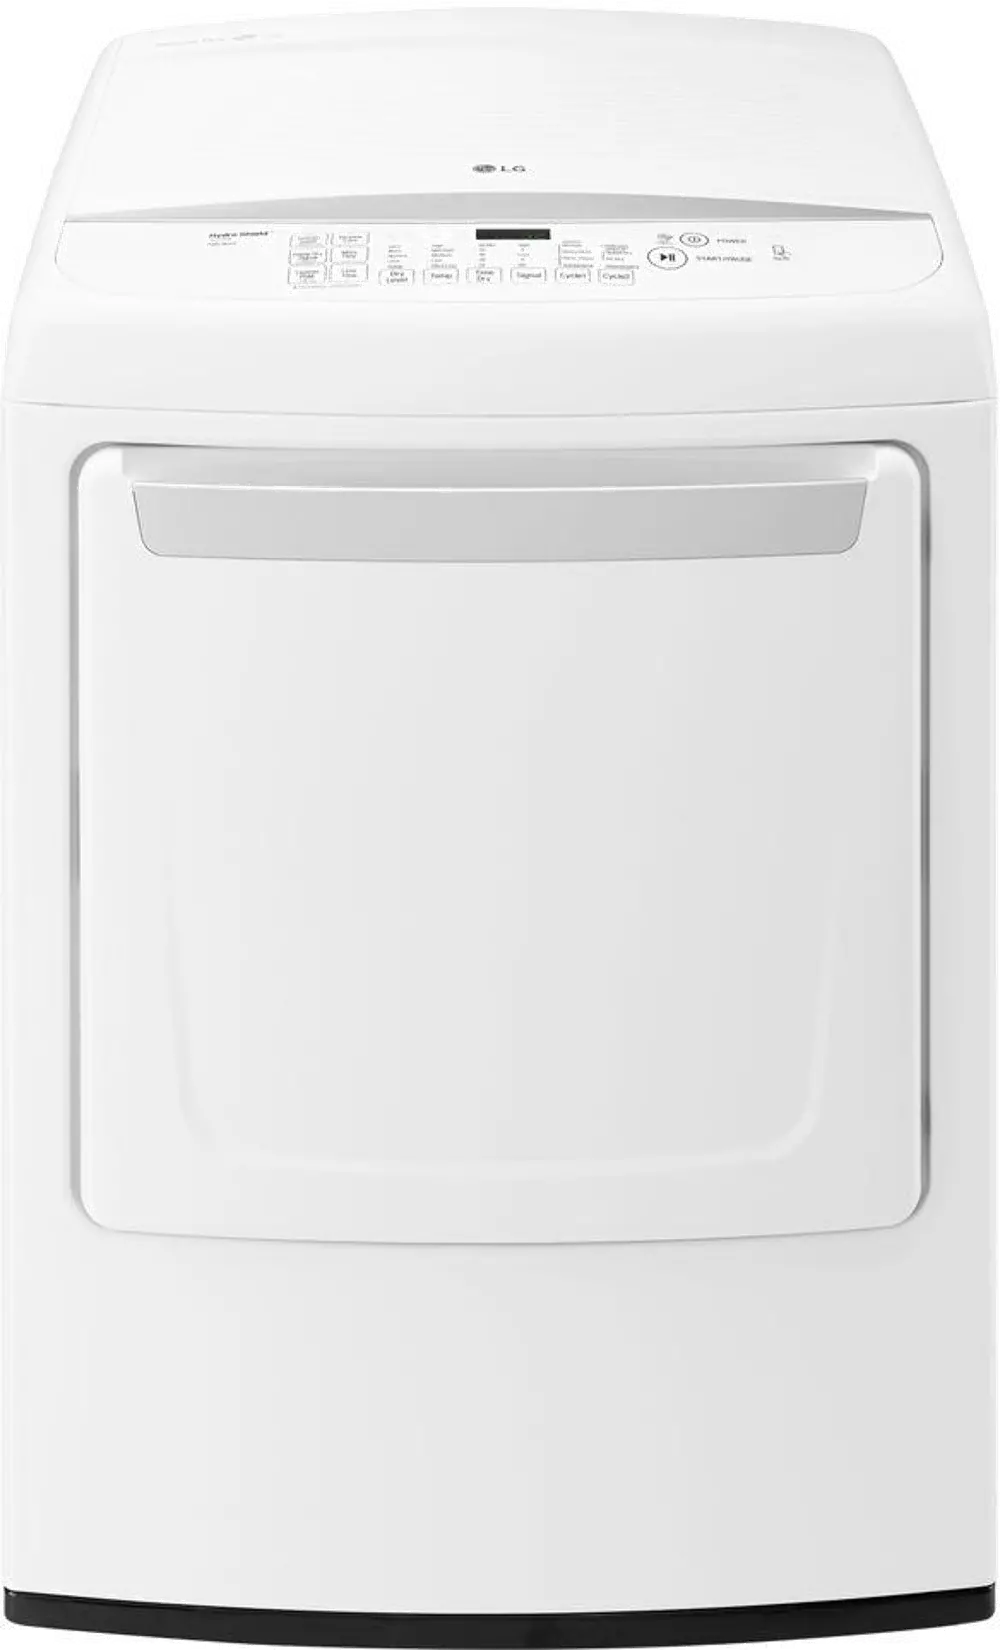 DLE1501W LG Electric Dryer with SmartDiagnosis - 7.3 cu. ft. White-1